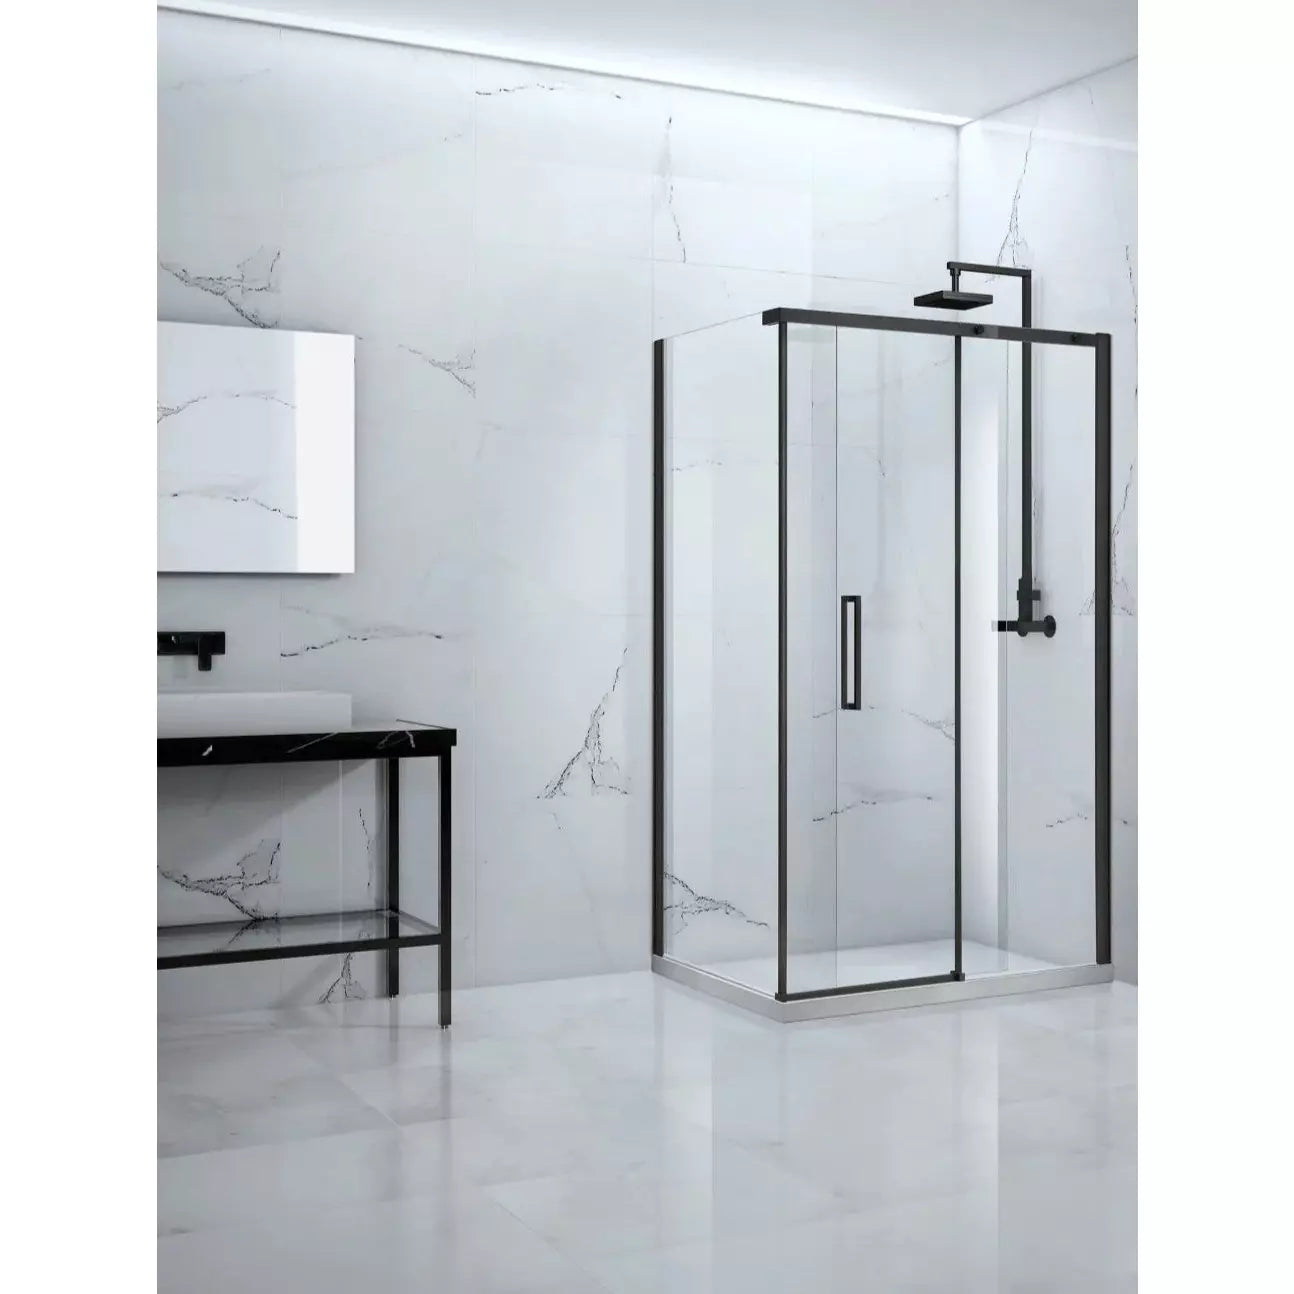 900mm Onyx Side Panel for Walk-In Shower & Wet Rooms